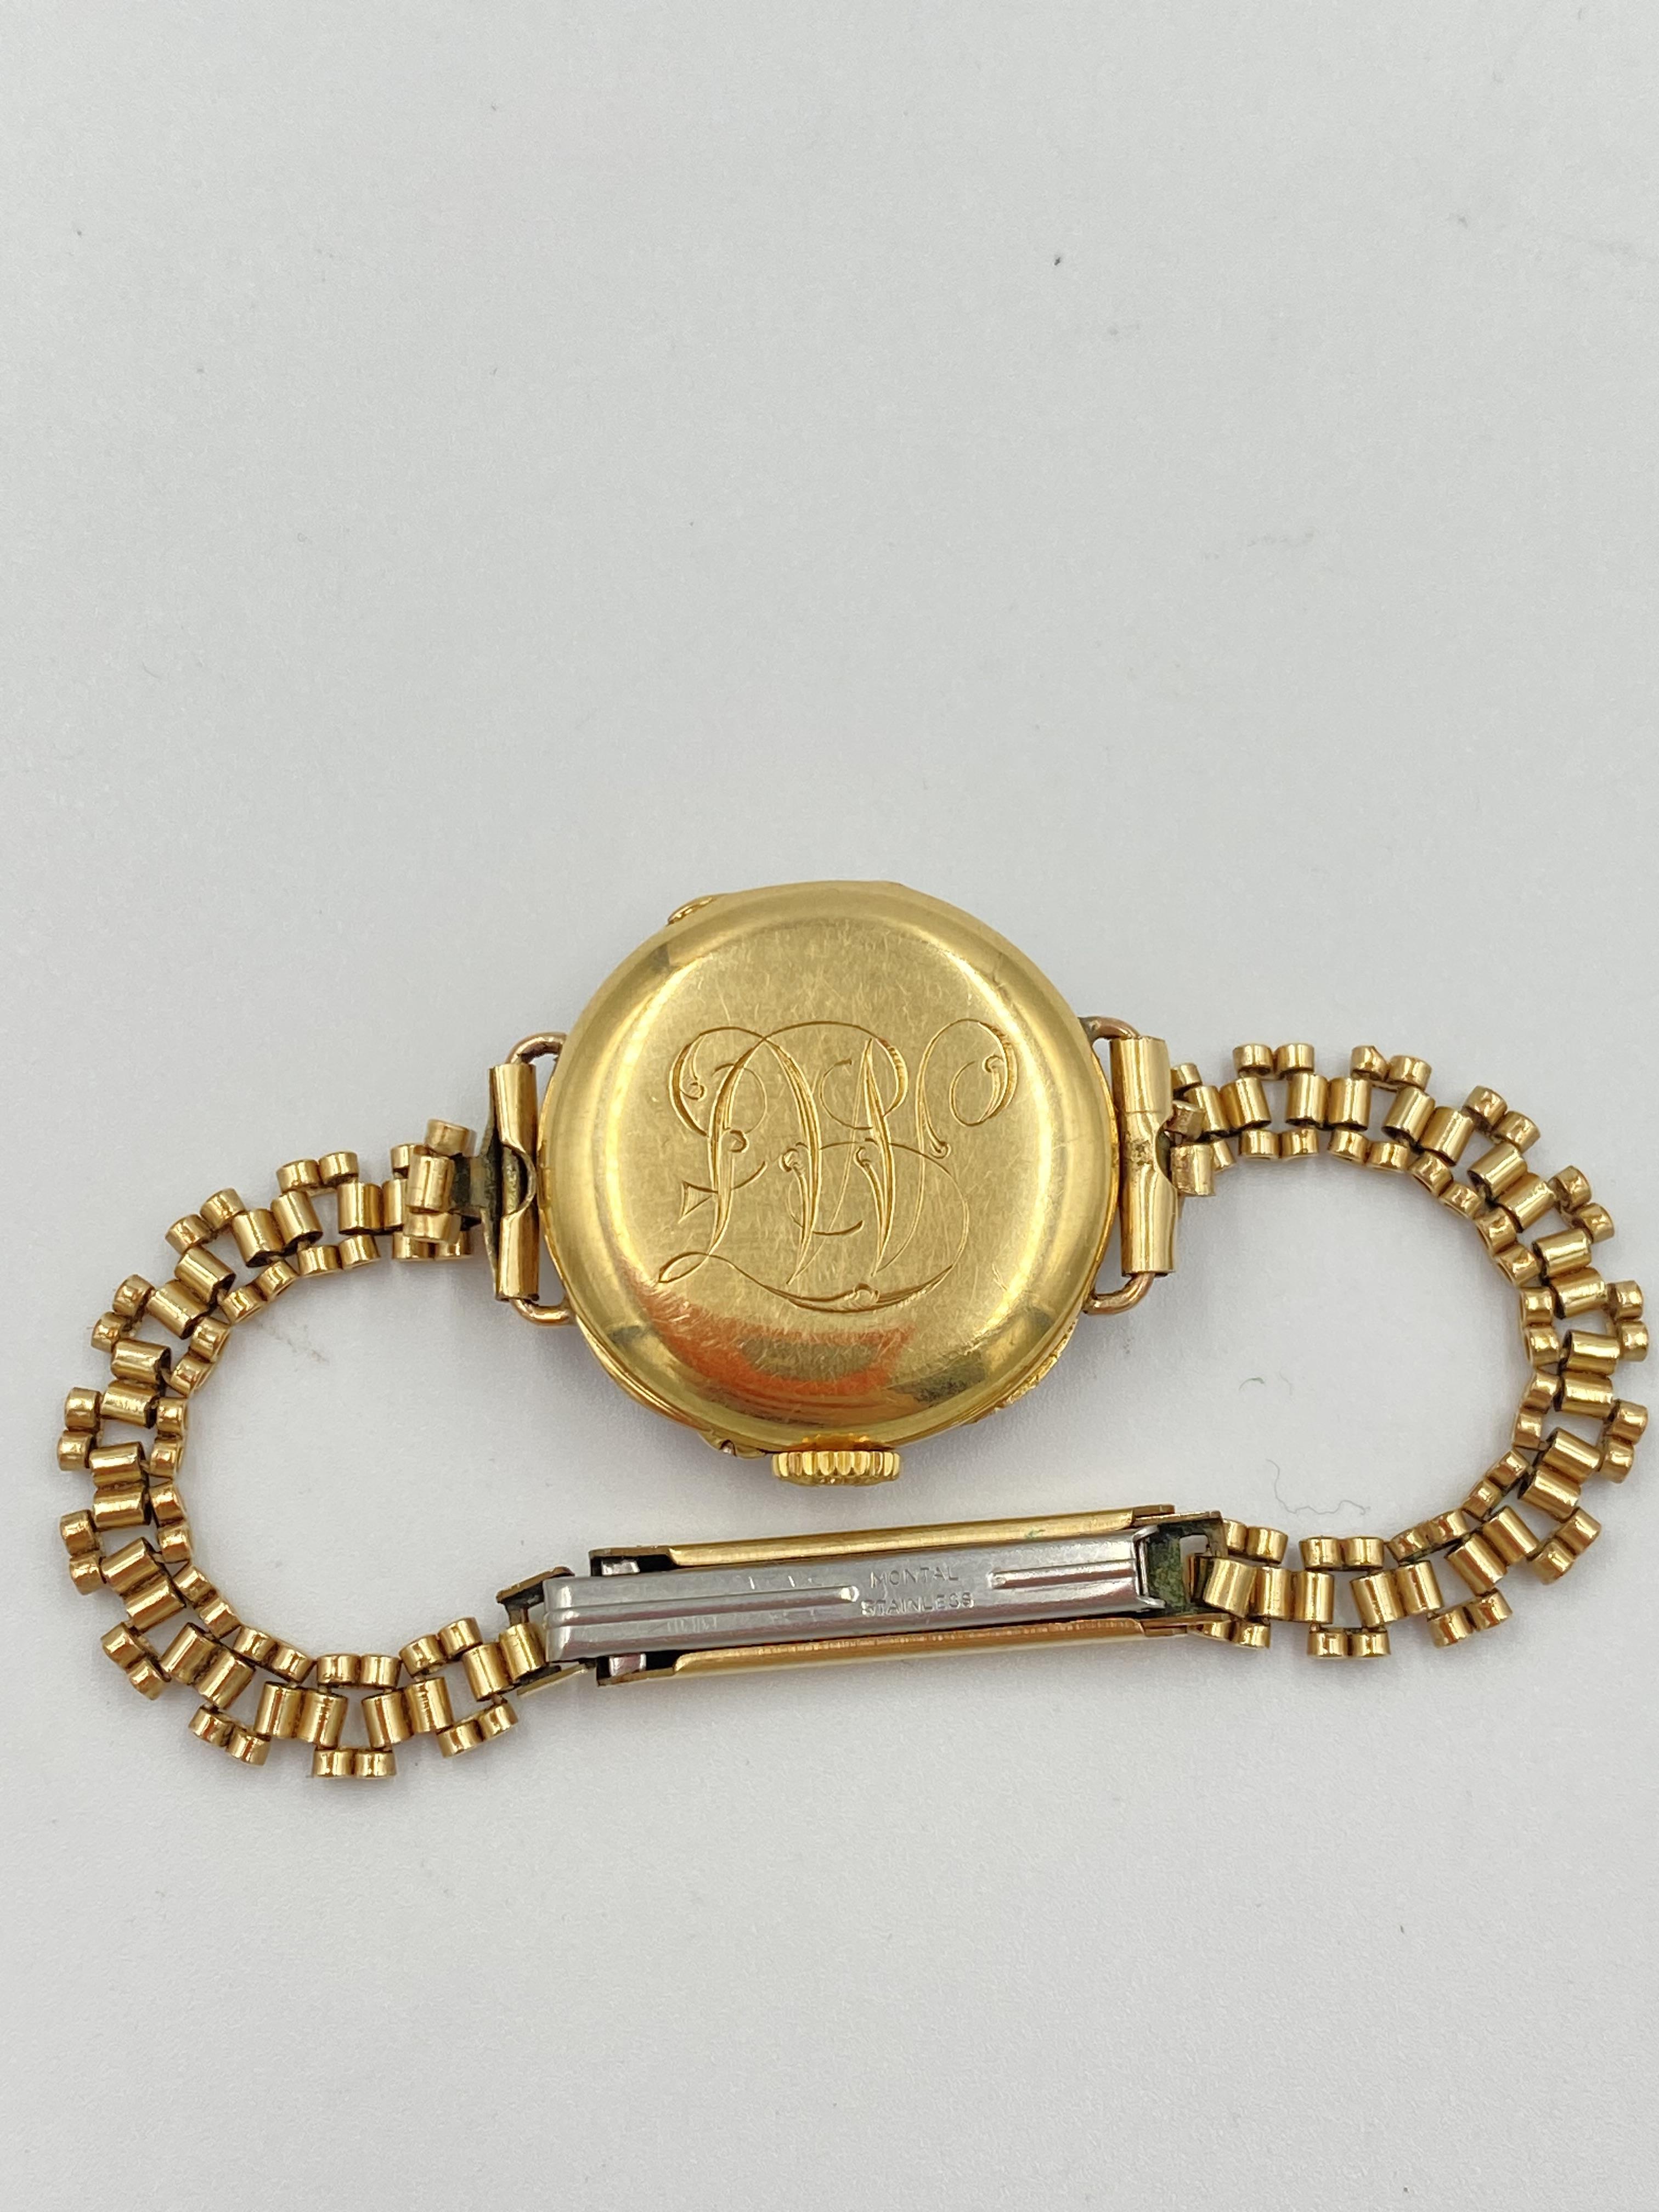 Ladies cocktail watch in 18ct gold case - Image 3 of 4